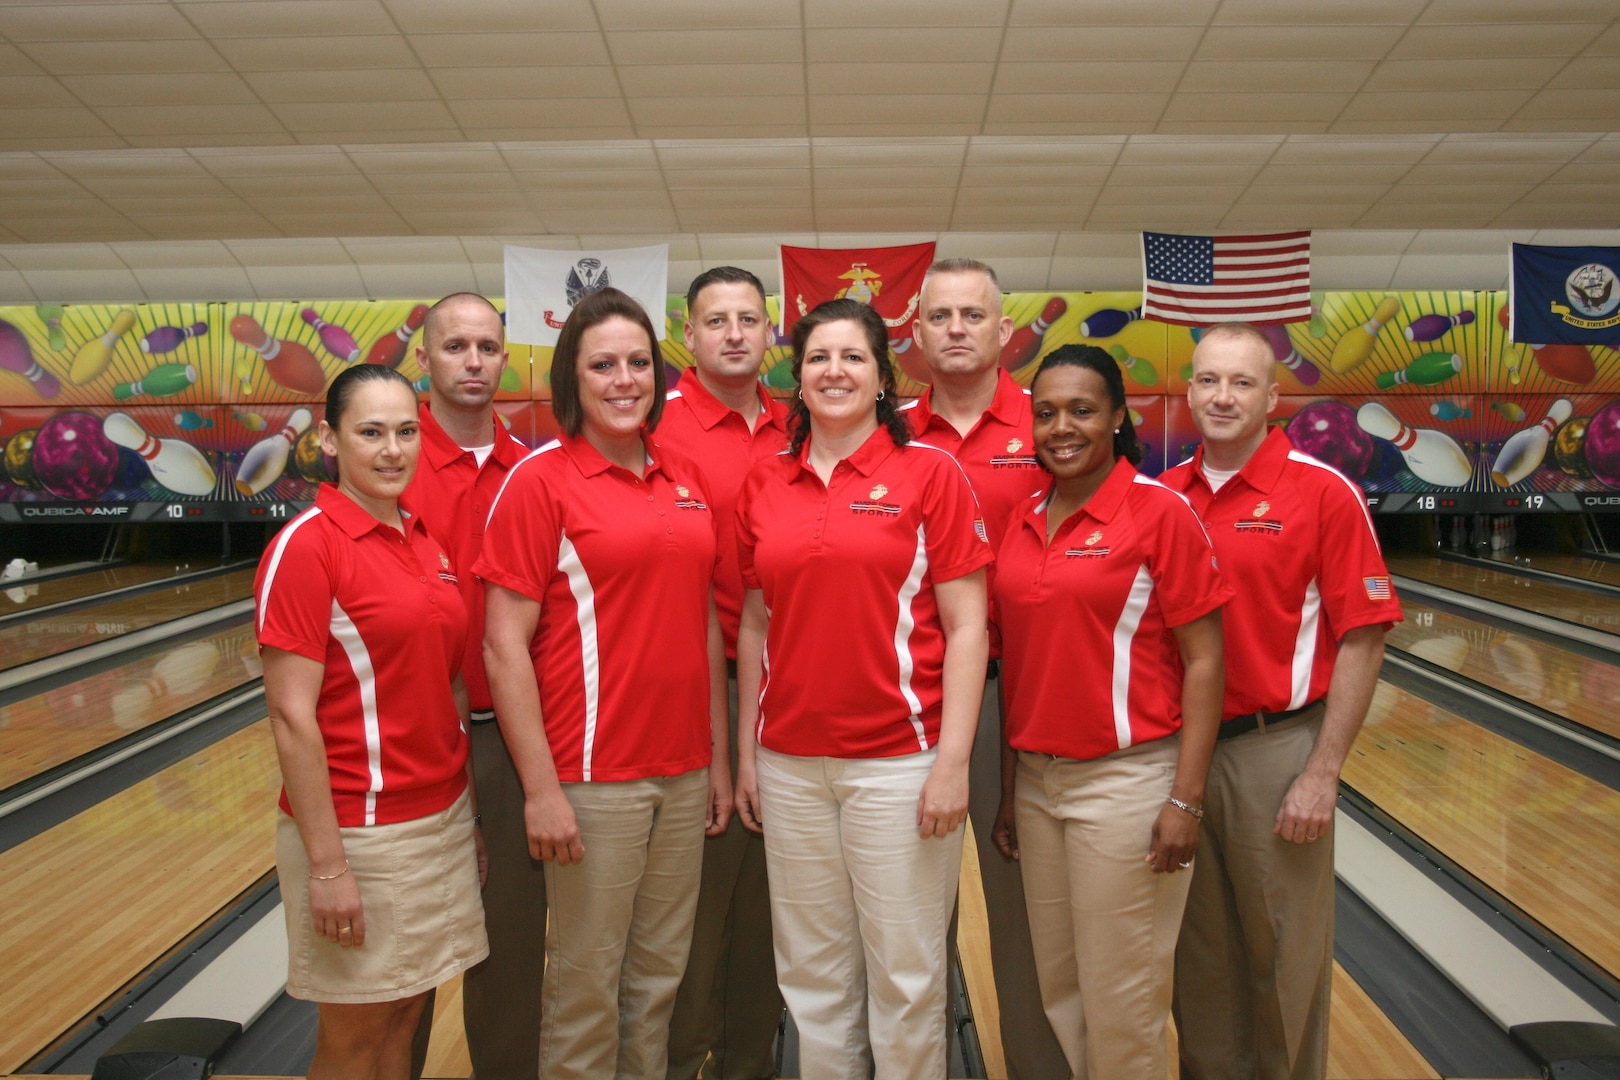 The All Marine Bowling team competes at the 2013 Armed Forces Bowling CHampionship hosted at MCB Camp Lejeune, NC 22-27 April.